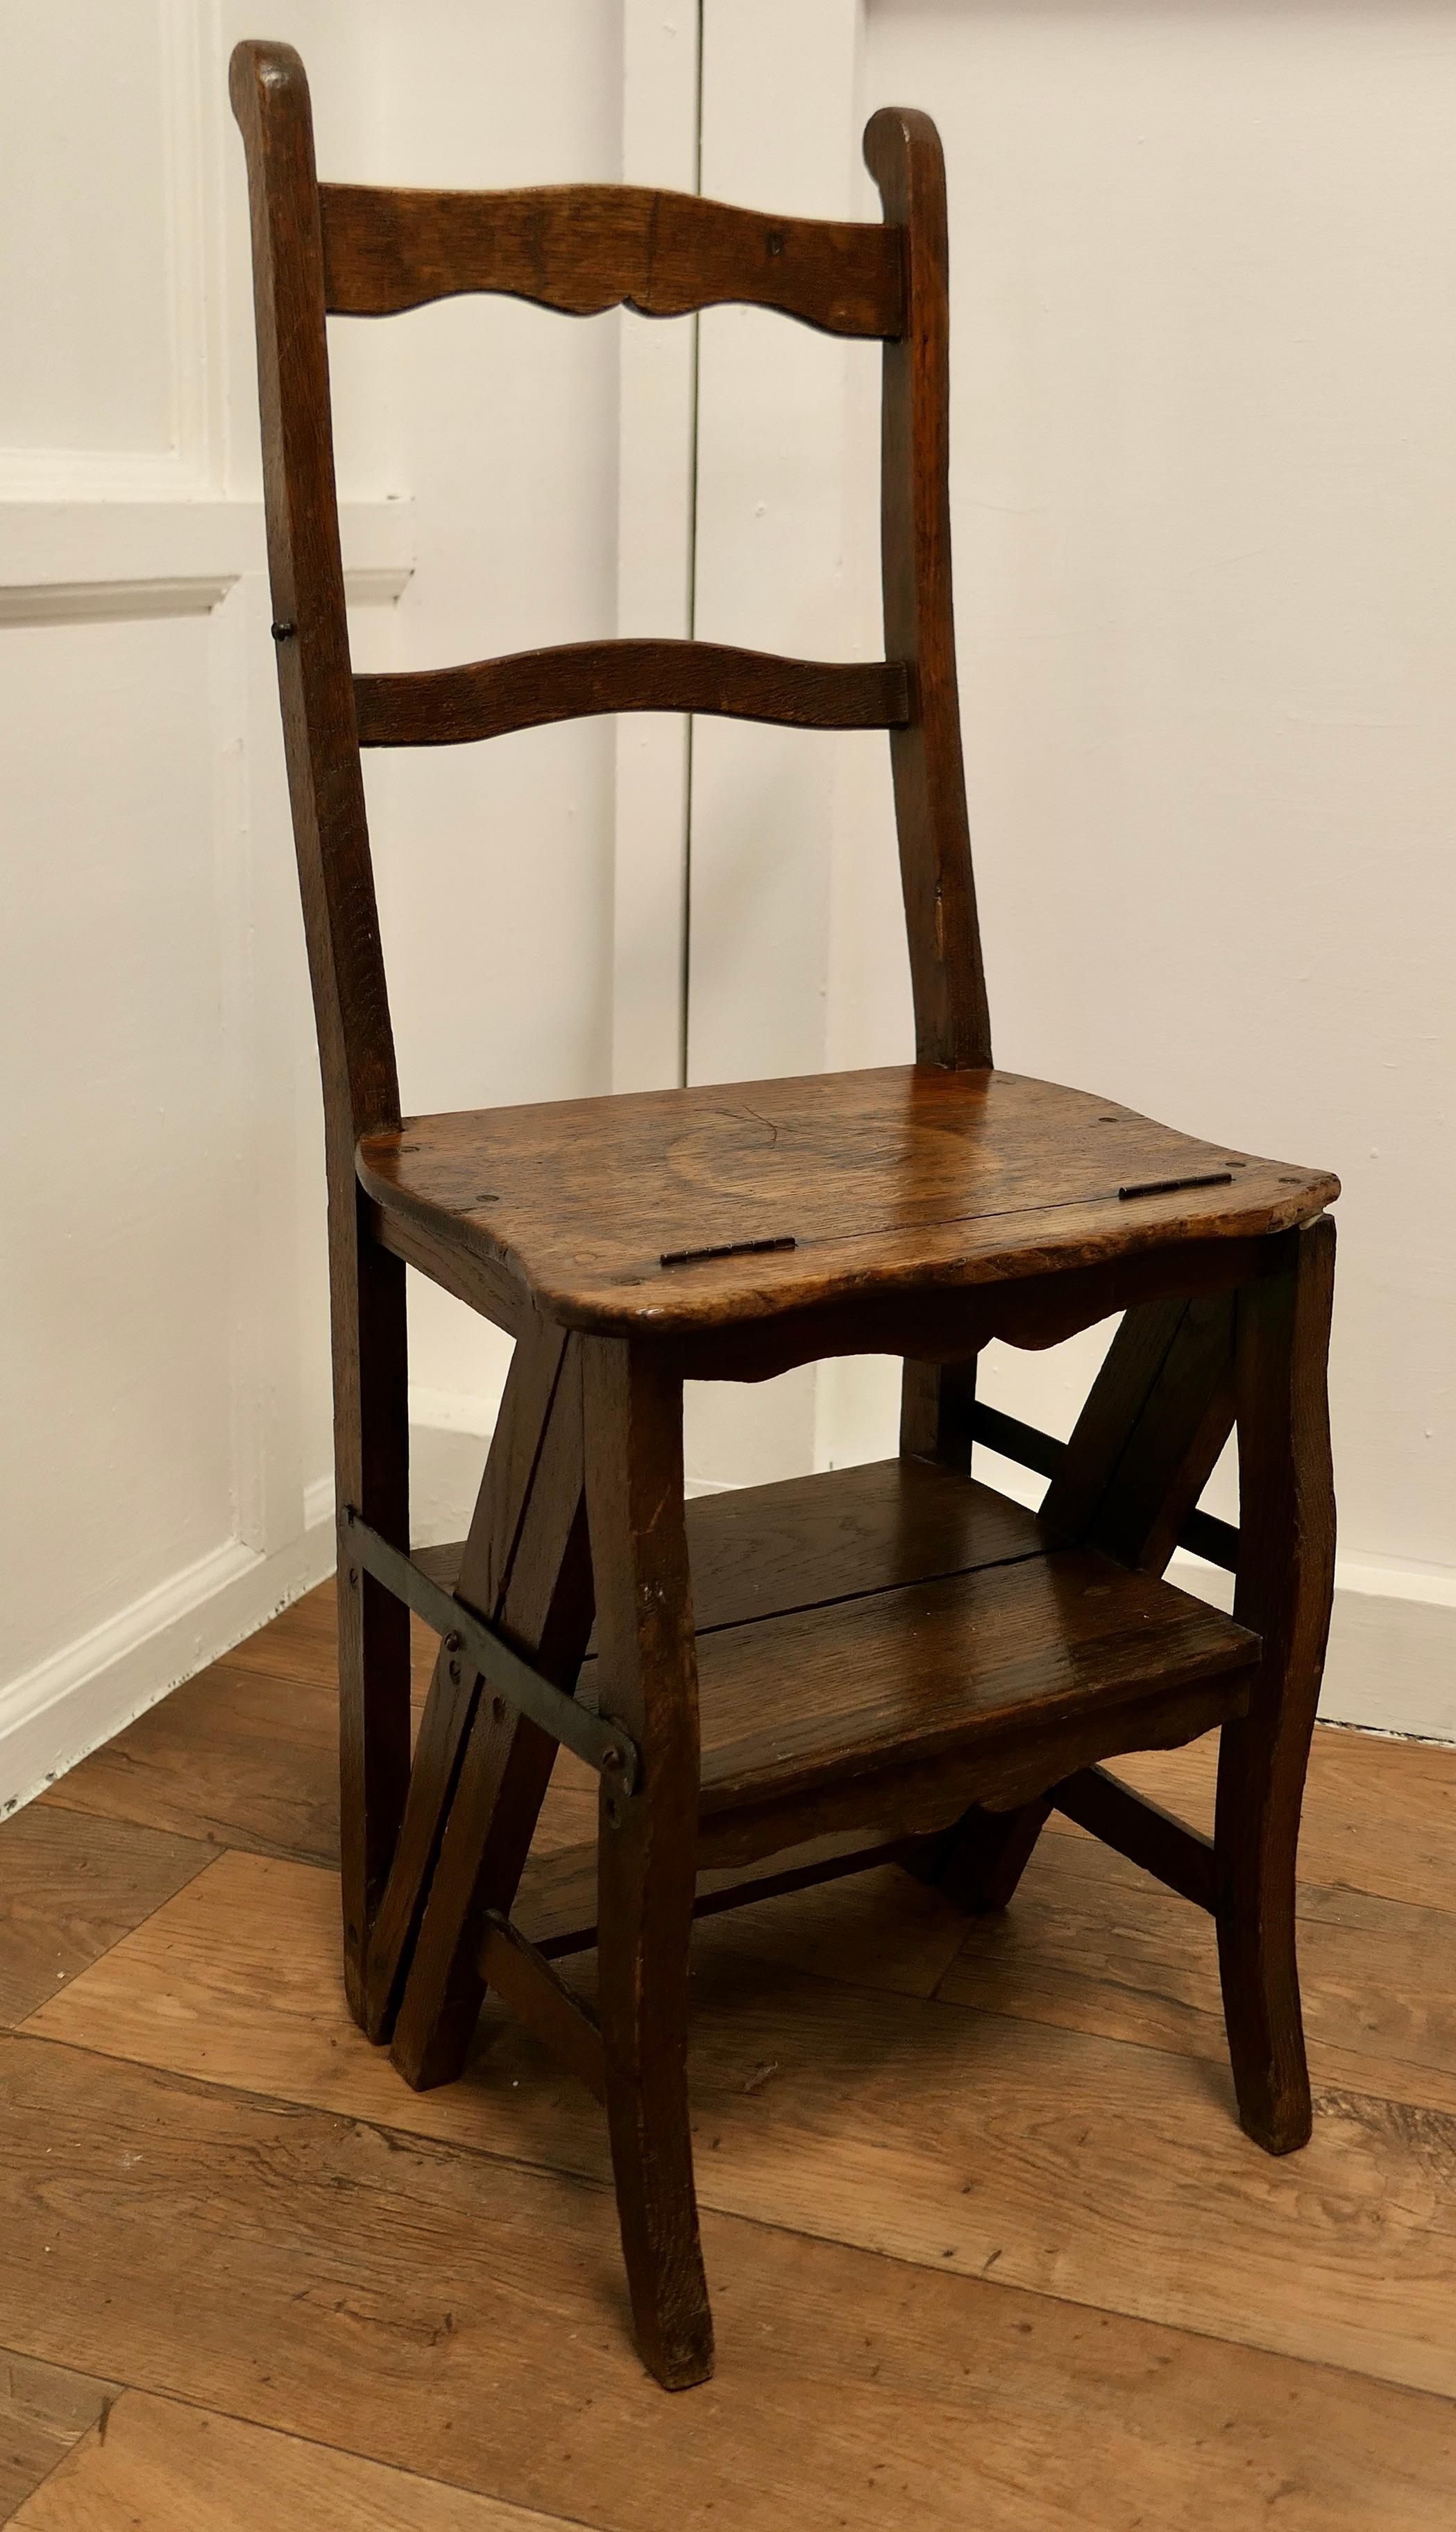 French Country Metamorphic Chair and Sturdy Ladder Steps

A very useful piece, this handy little chair can be flipped over and turned into a small 4 step ladder, originally this type of chair was used in a shop or library but it would work very